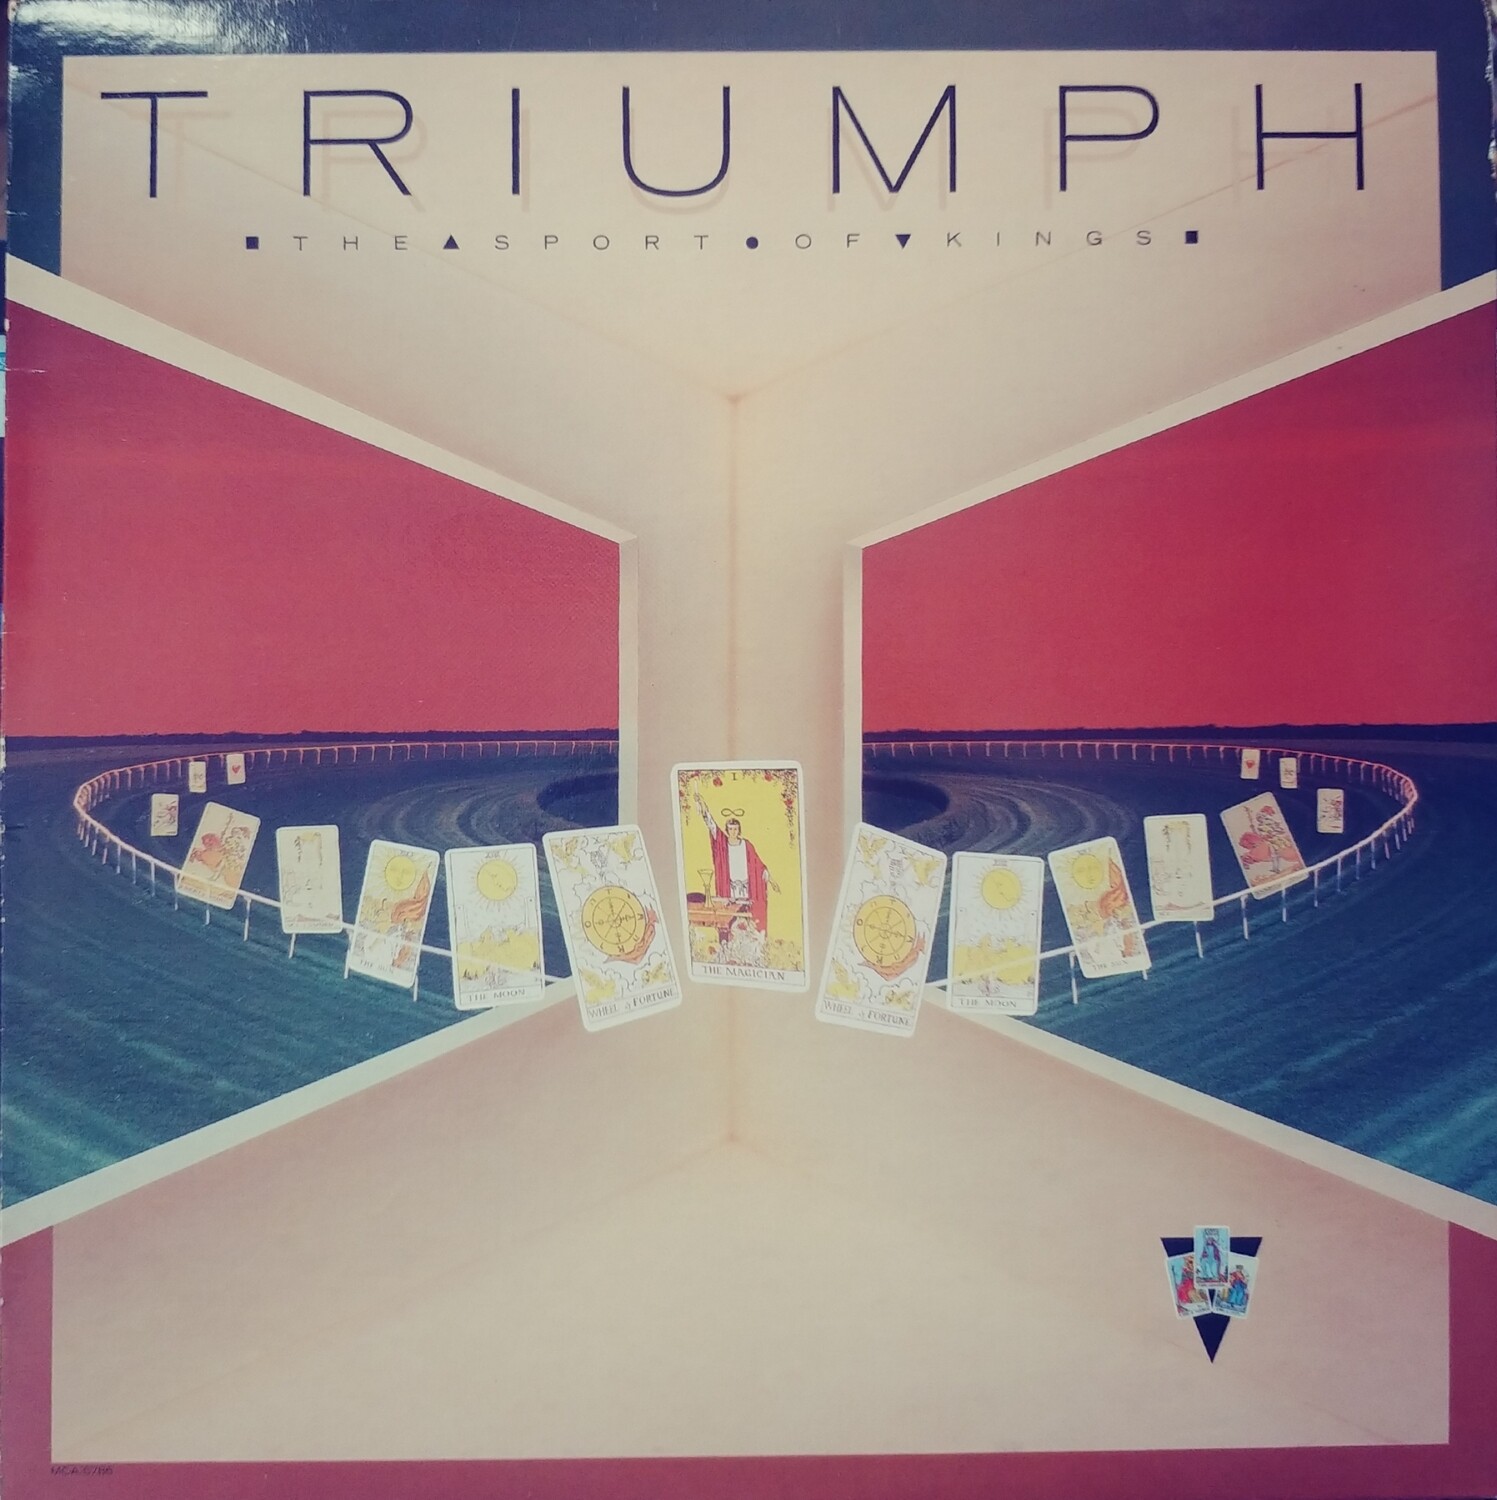 Triumph - The sport of kings